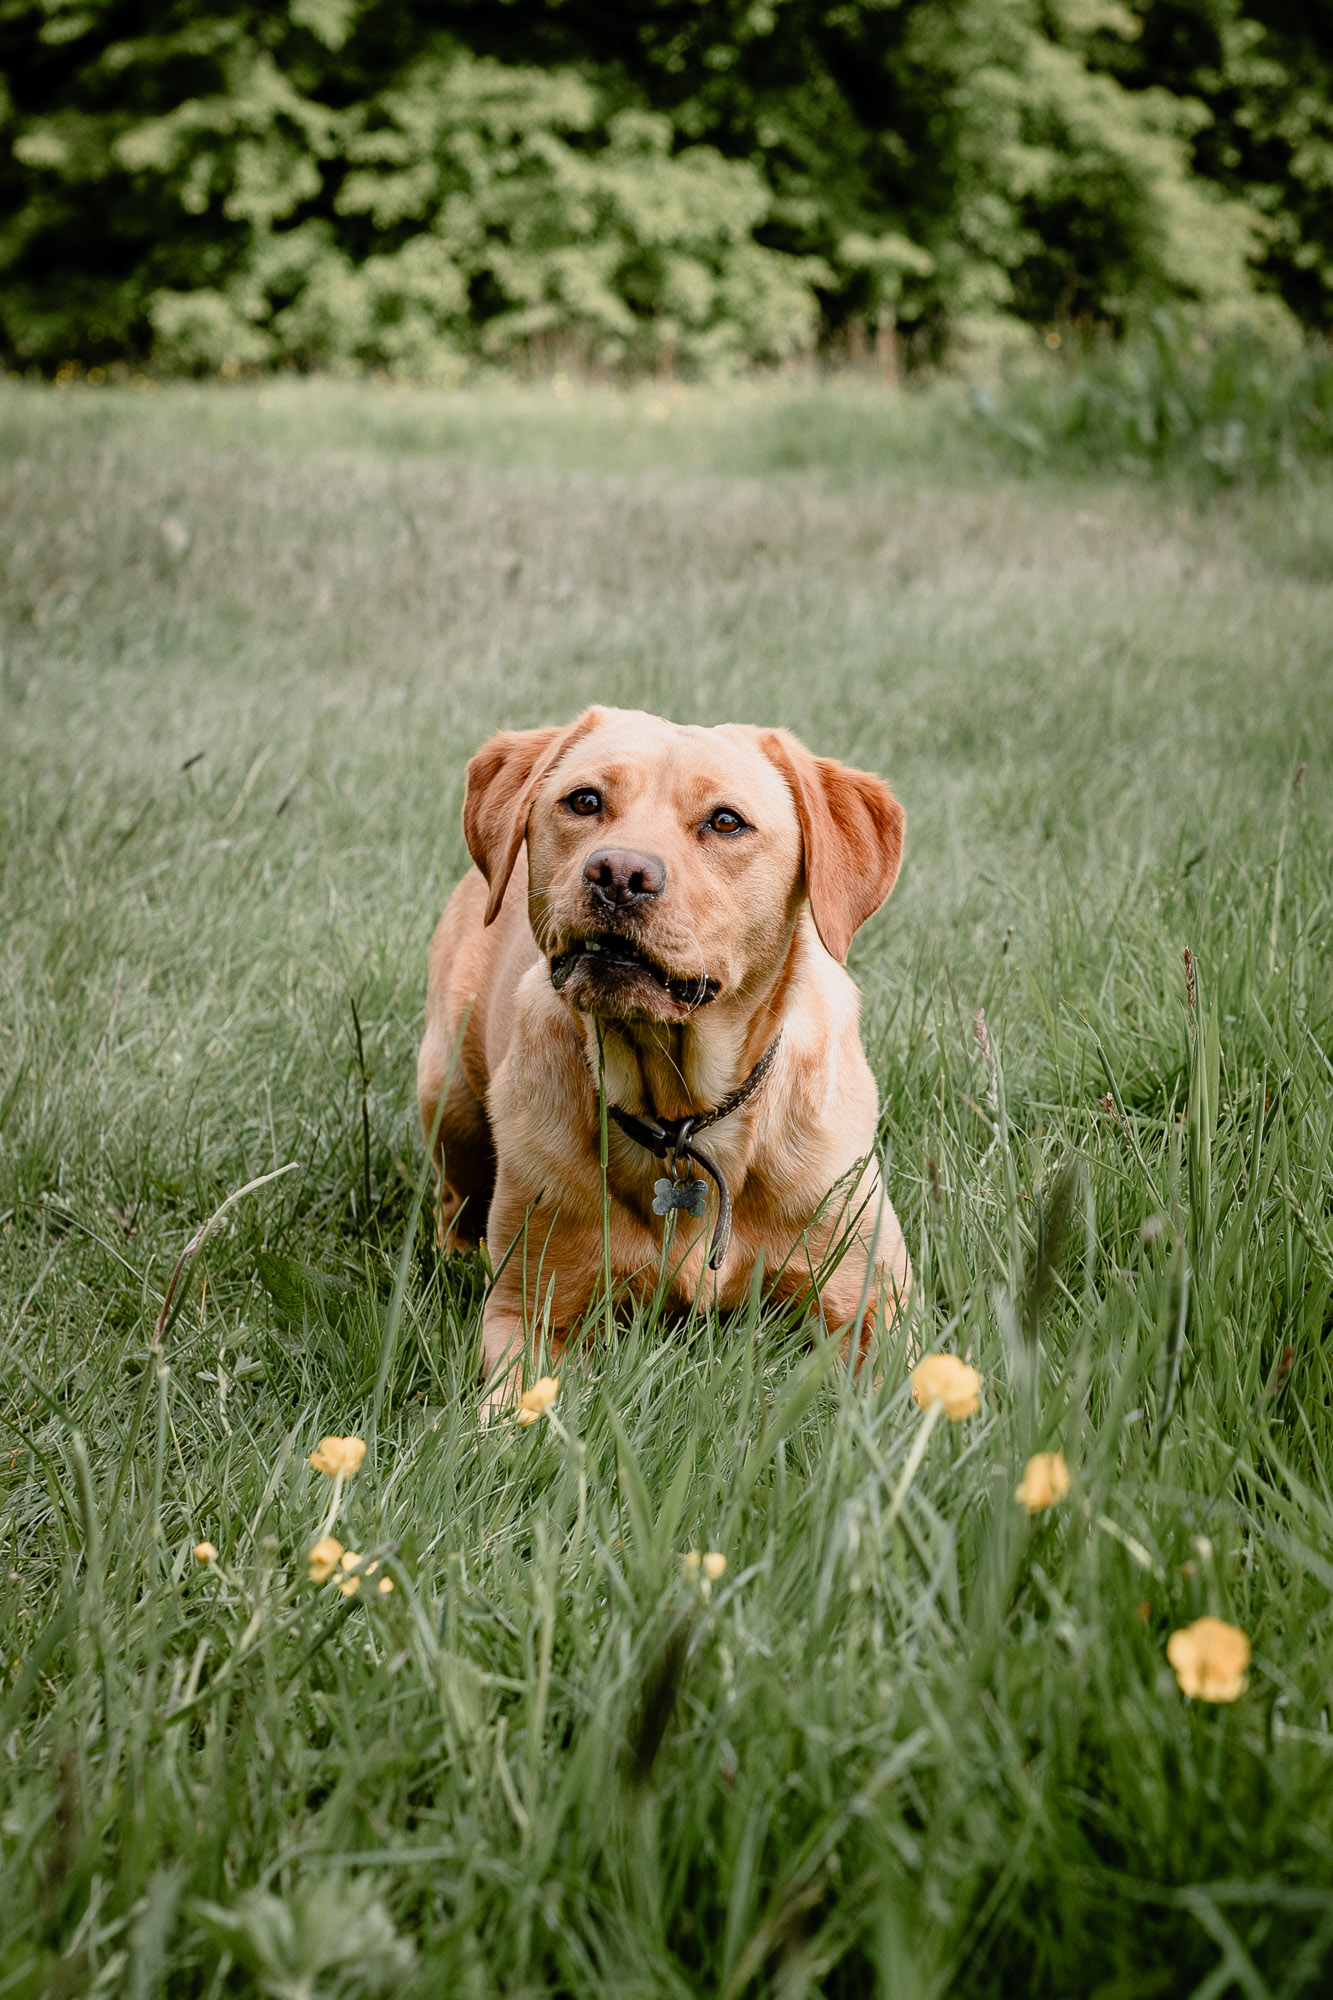 A red Labrador dog looking intently towards his owner who stands off camera, while lying in wait in the grass on an environmental newborn photoshoot in Horsham West Sussex.